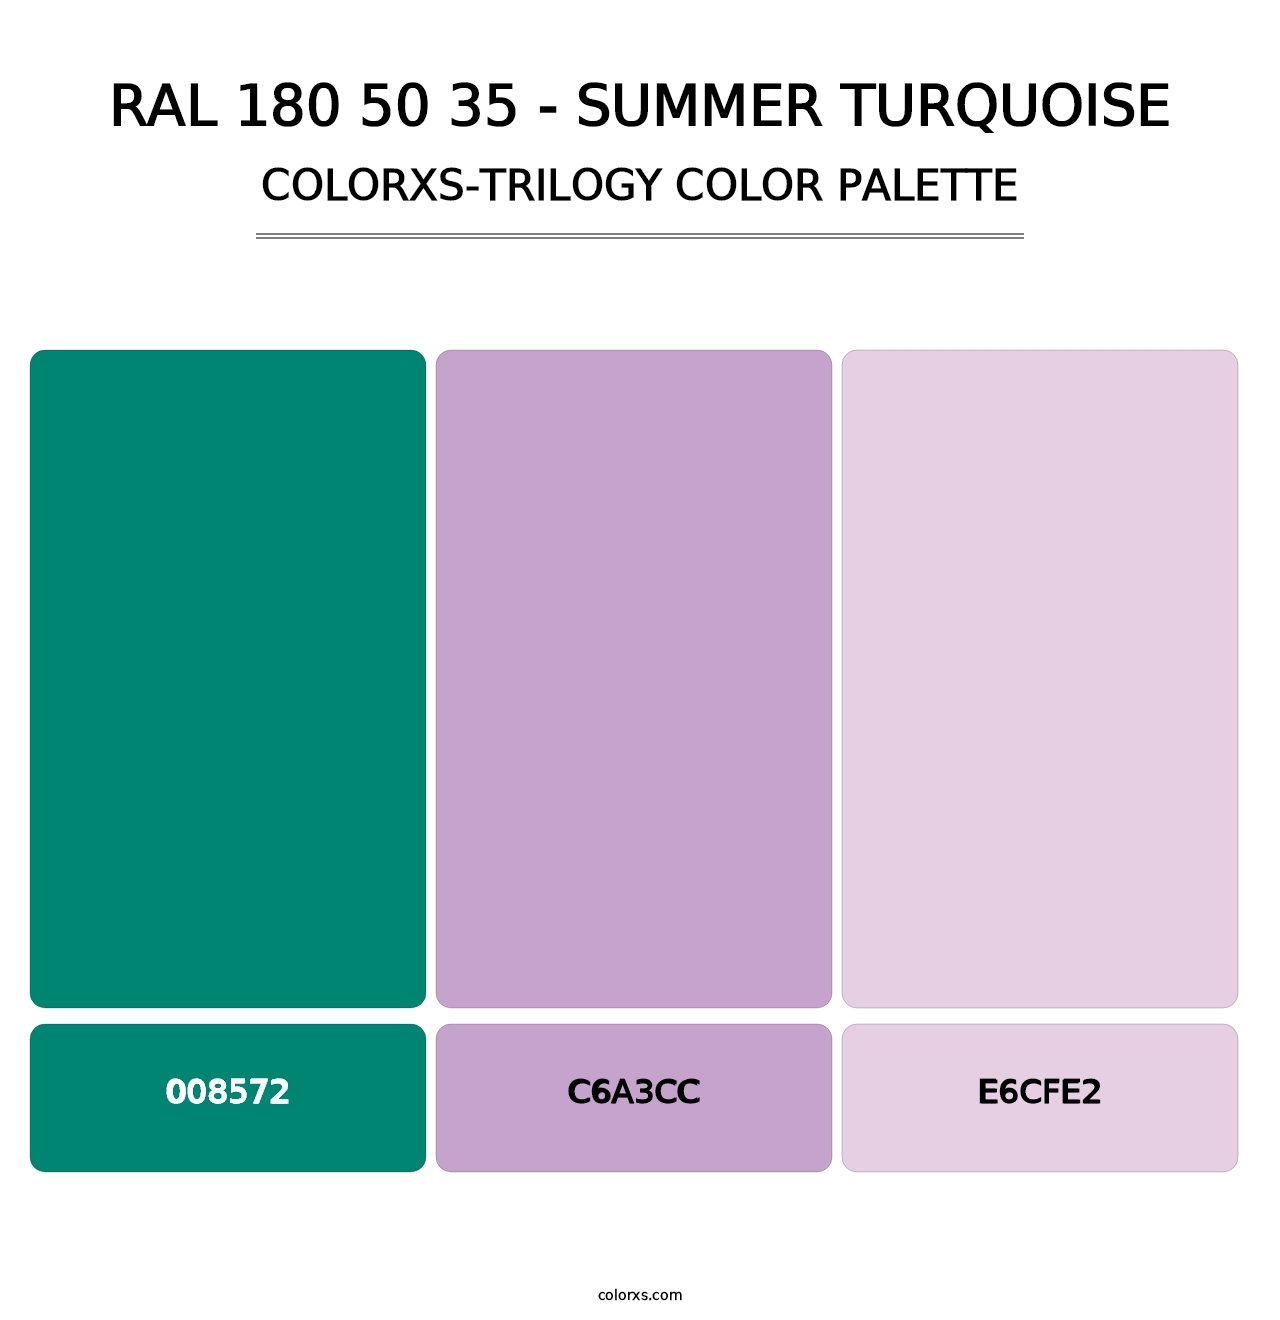 RAL 180 50 35 - Summer Turquoise - Colorxs Trilogy Palette